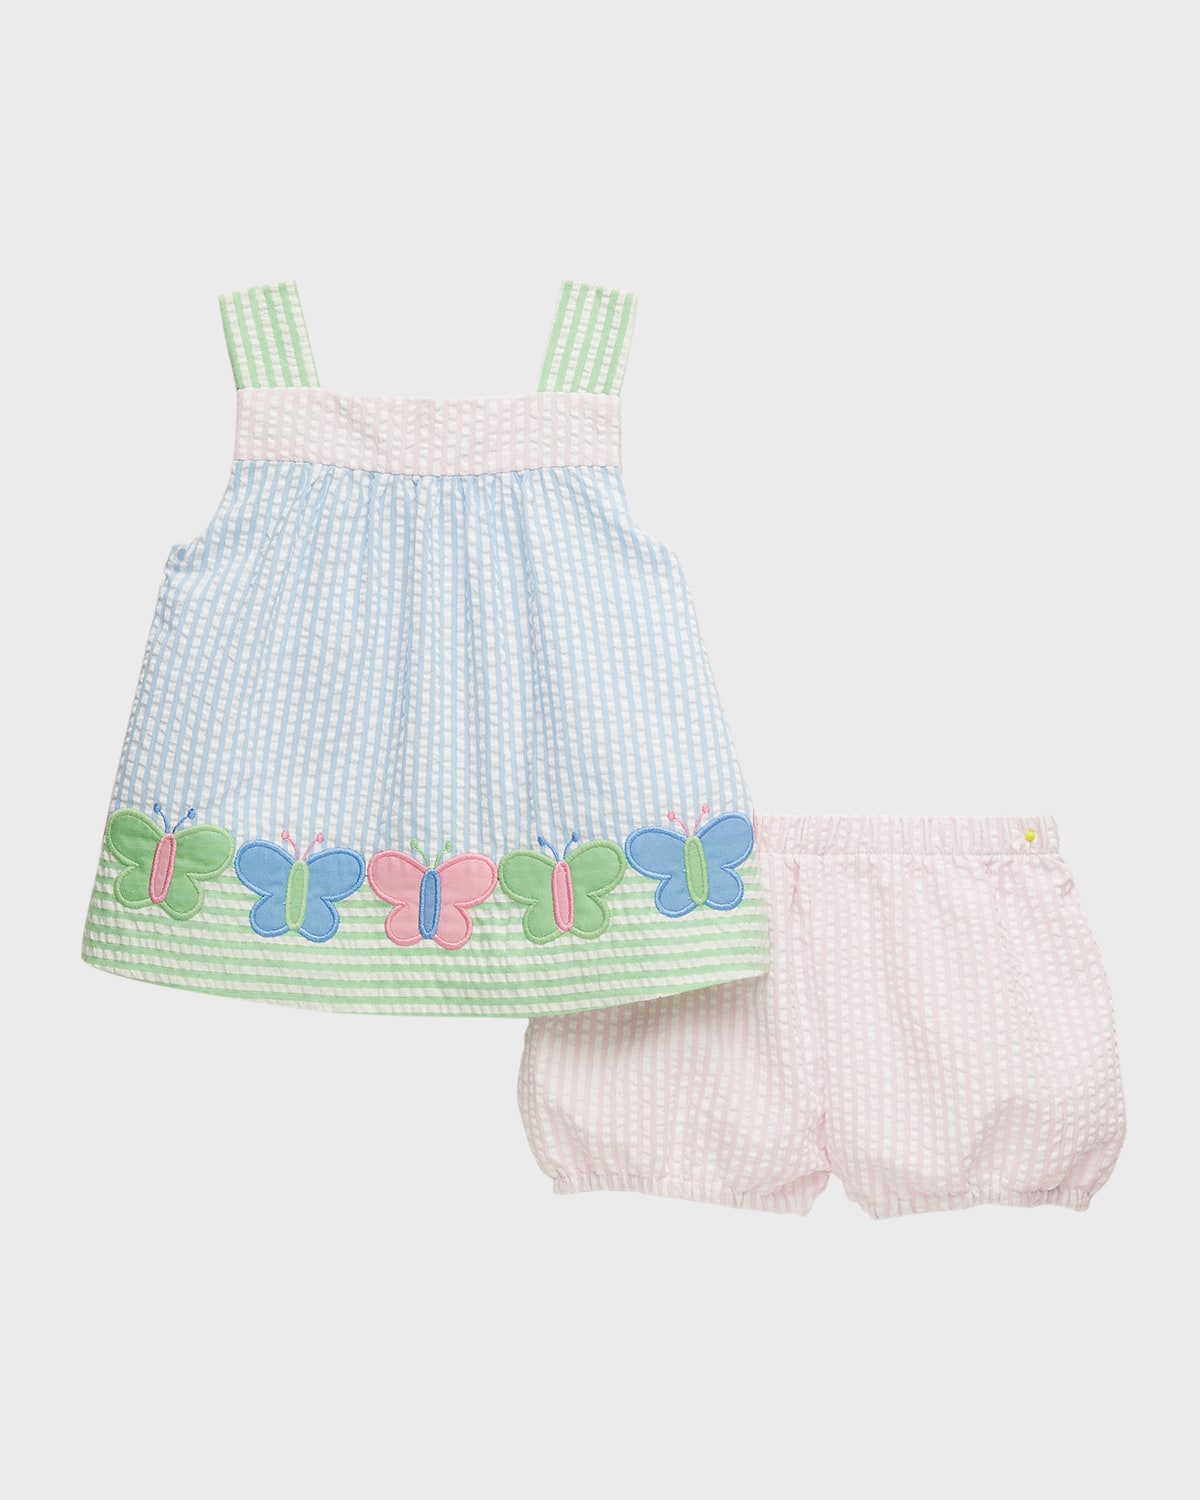 Florence Eiseman Babies' Girl's Embroidered Seersucker Striped Dress W/ Bloomers In Multi